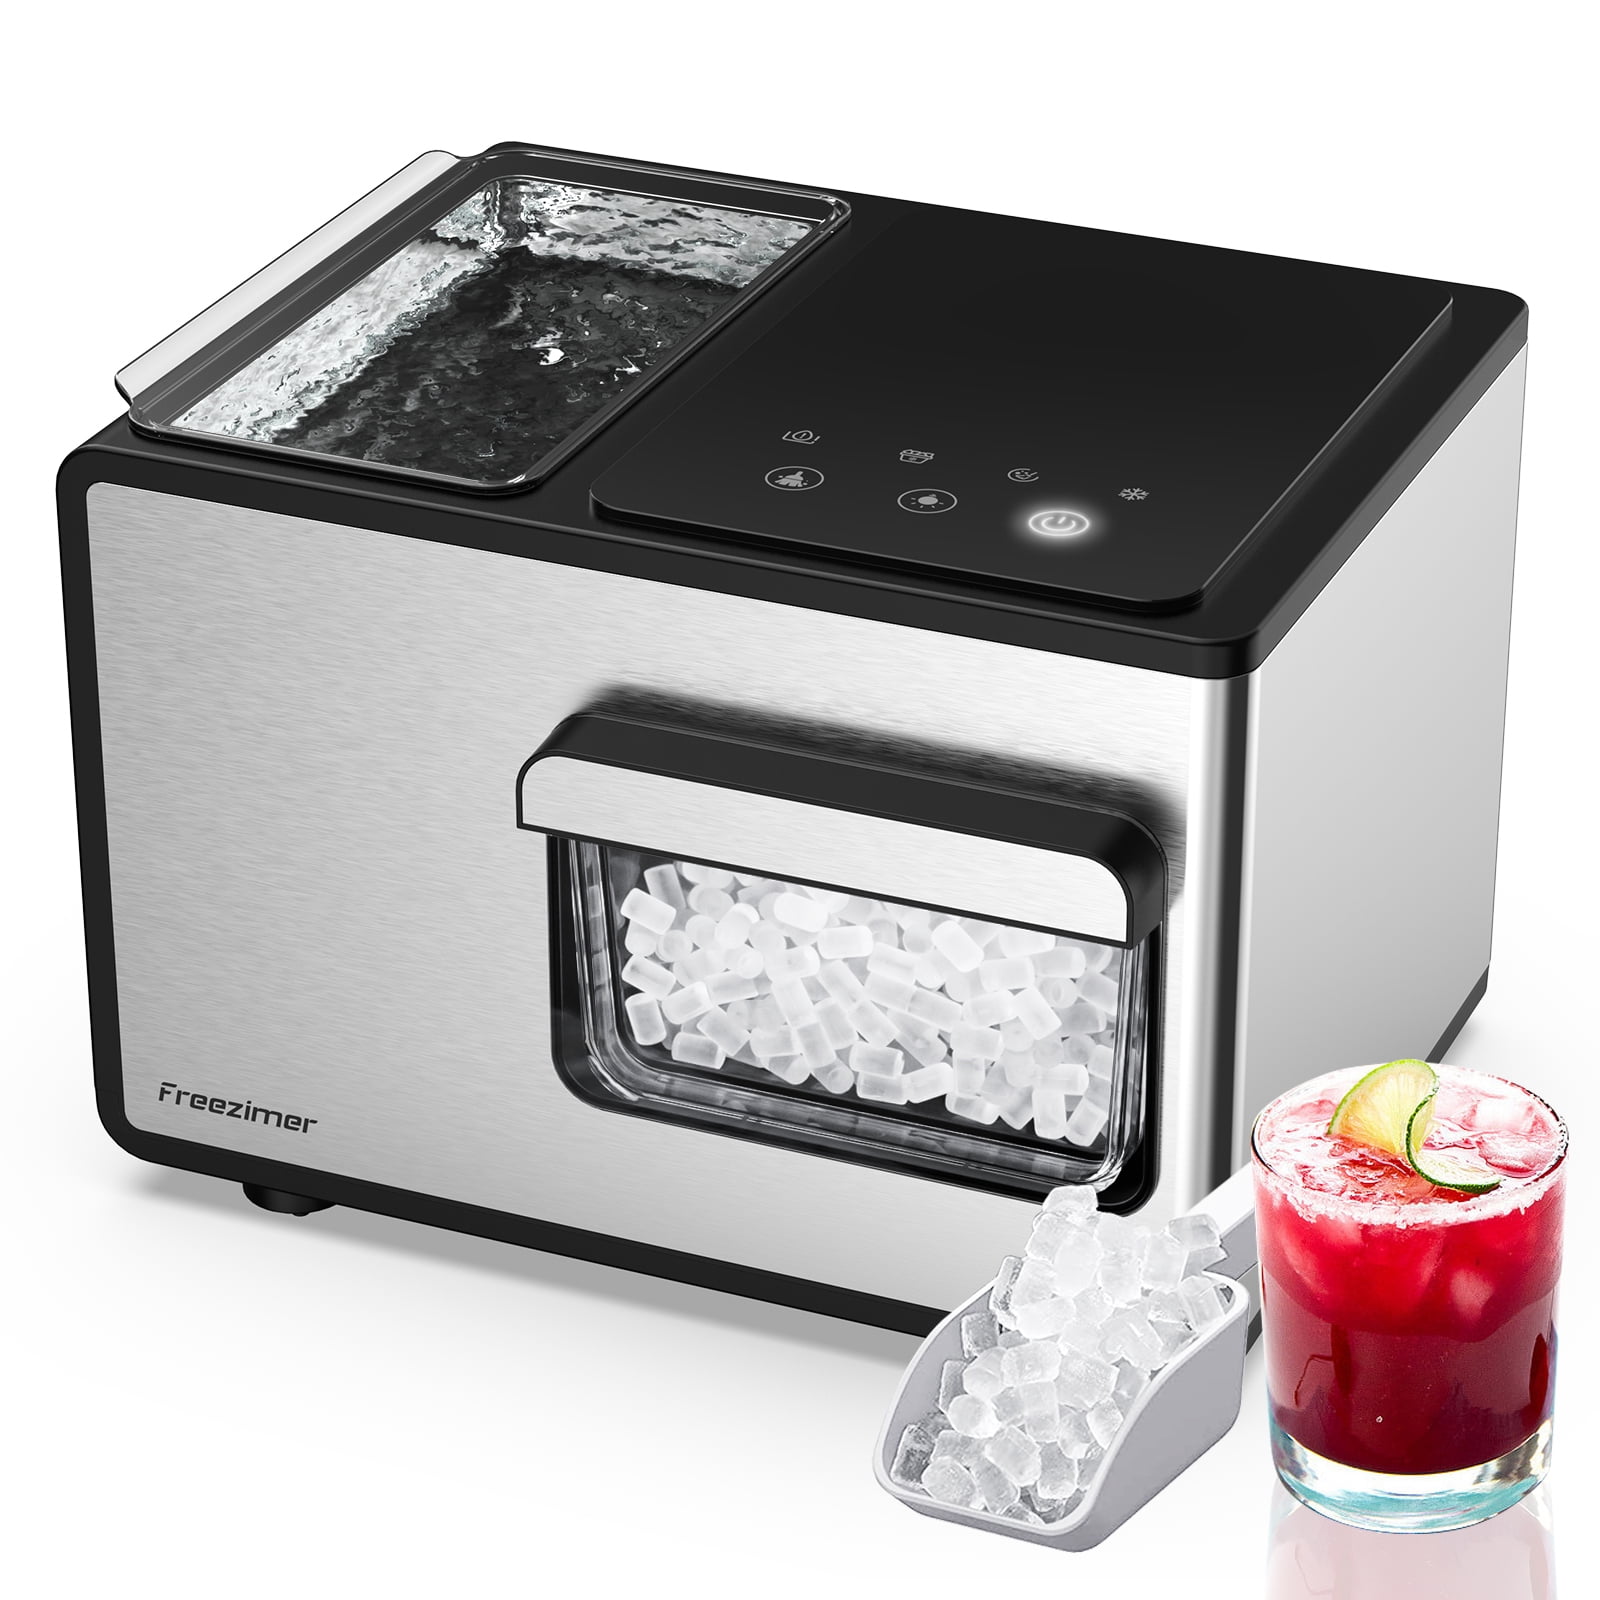 Famistar Portable Countertop Nugget Ice Maker , 55Lbs/24H Sonic Ice Maker,  Quick Ice in 7 Mins, 2 Water Inlet Modes, Self-Cleaning, Chewable Nugget  Ice Maker Machine for Home Office Bar Cofe 